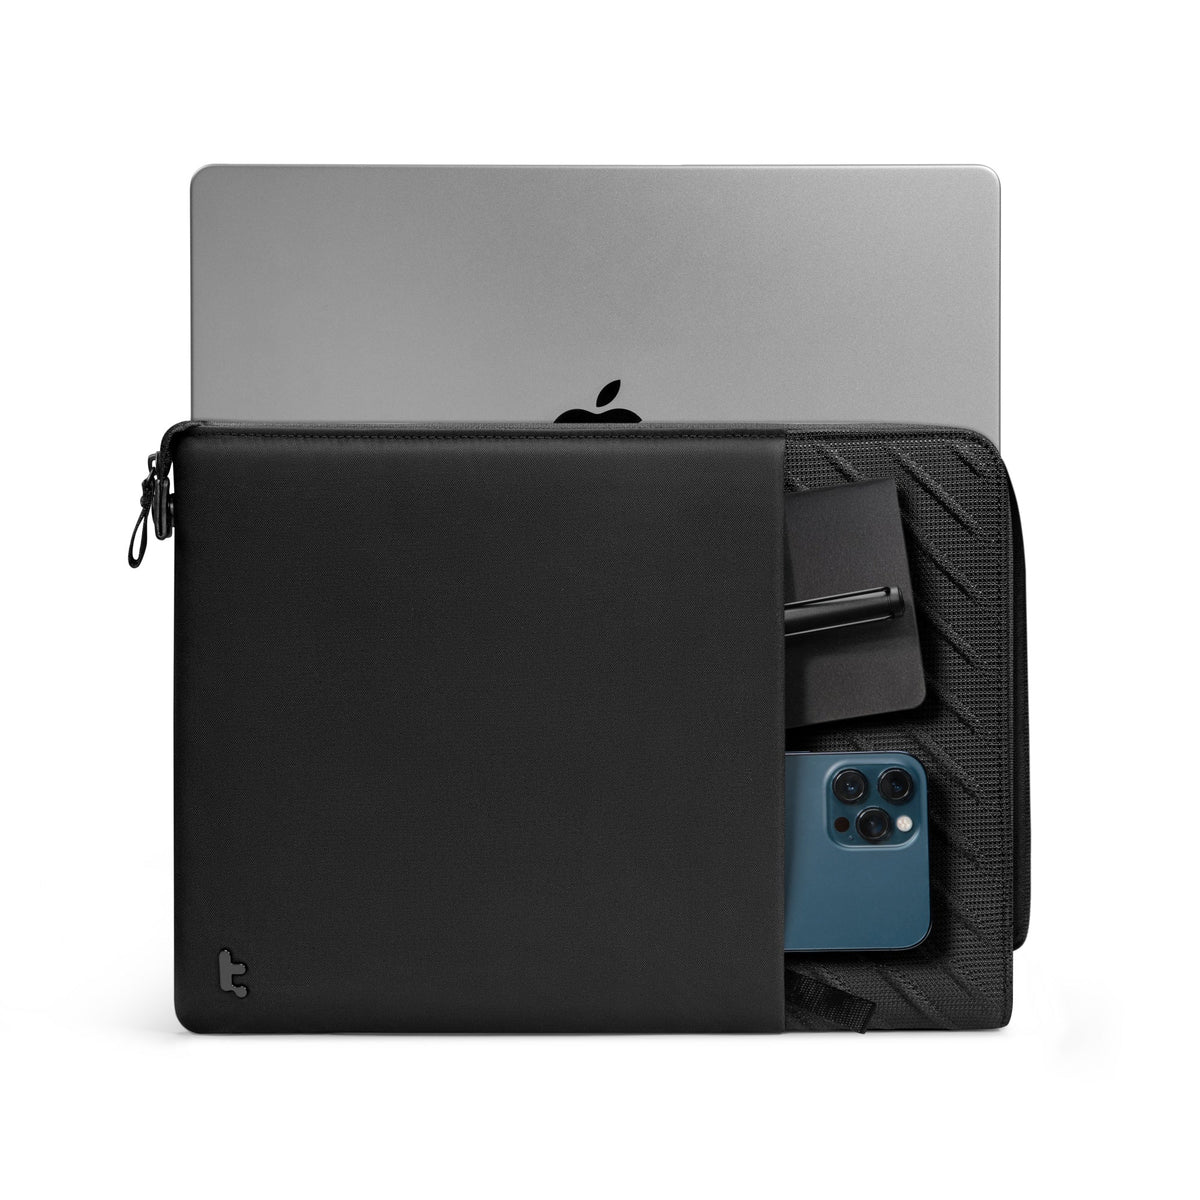 Voyage-A10 Laptop Sleeve for 16-inch MacBook Pro